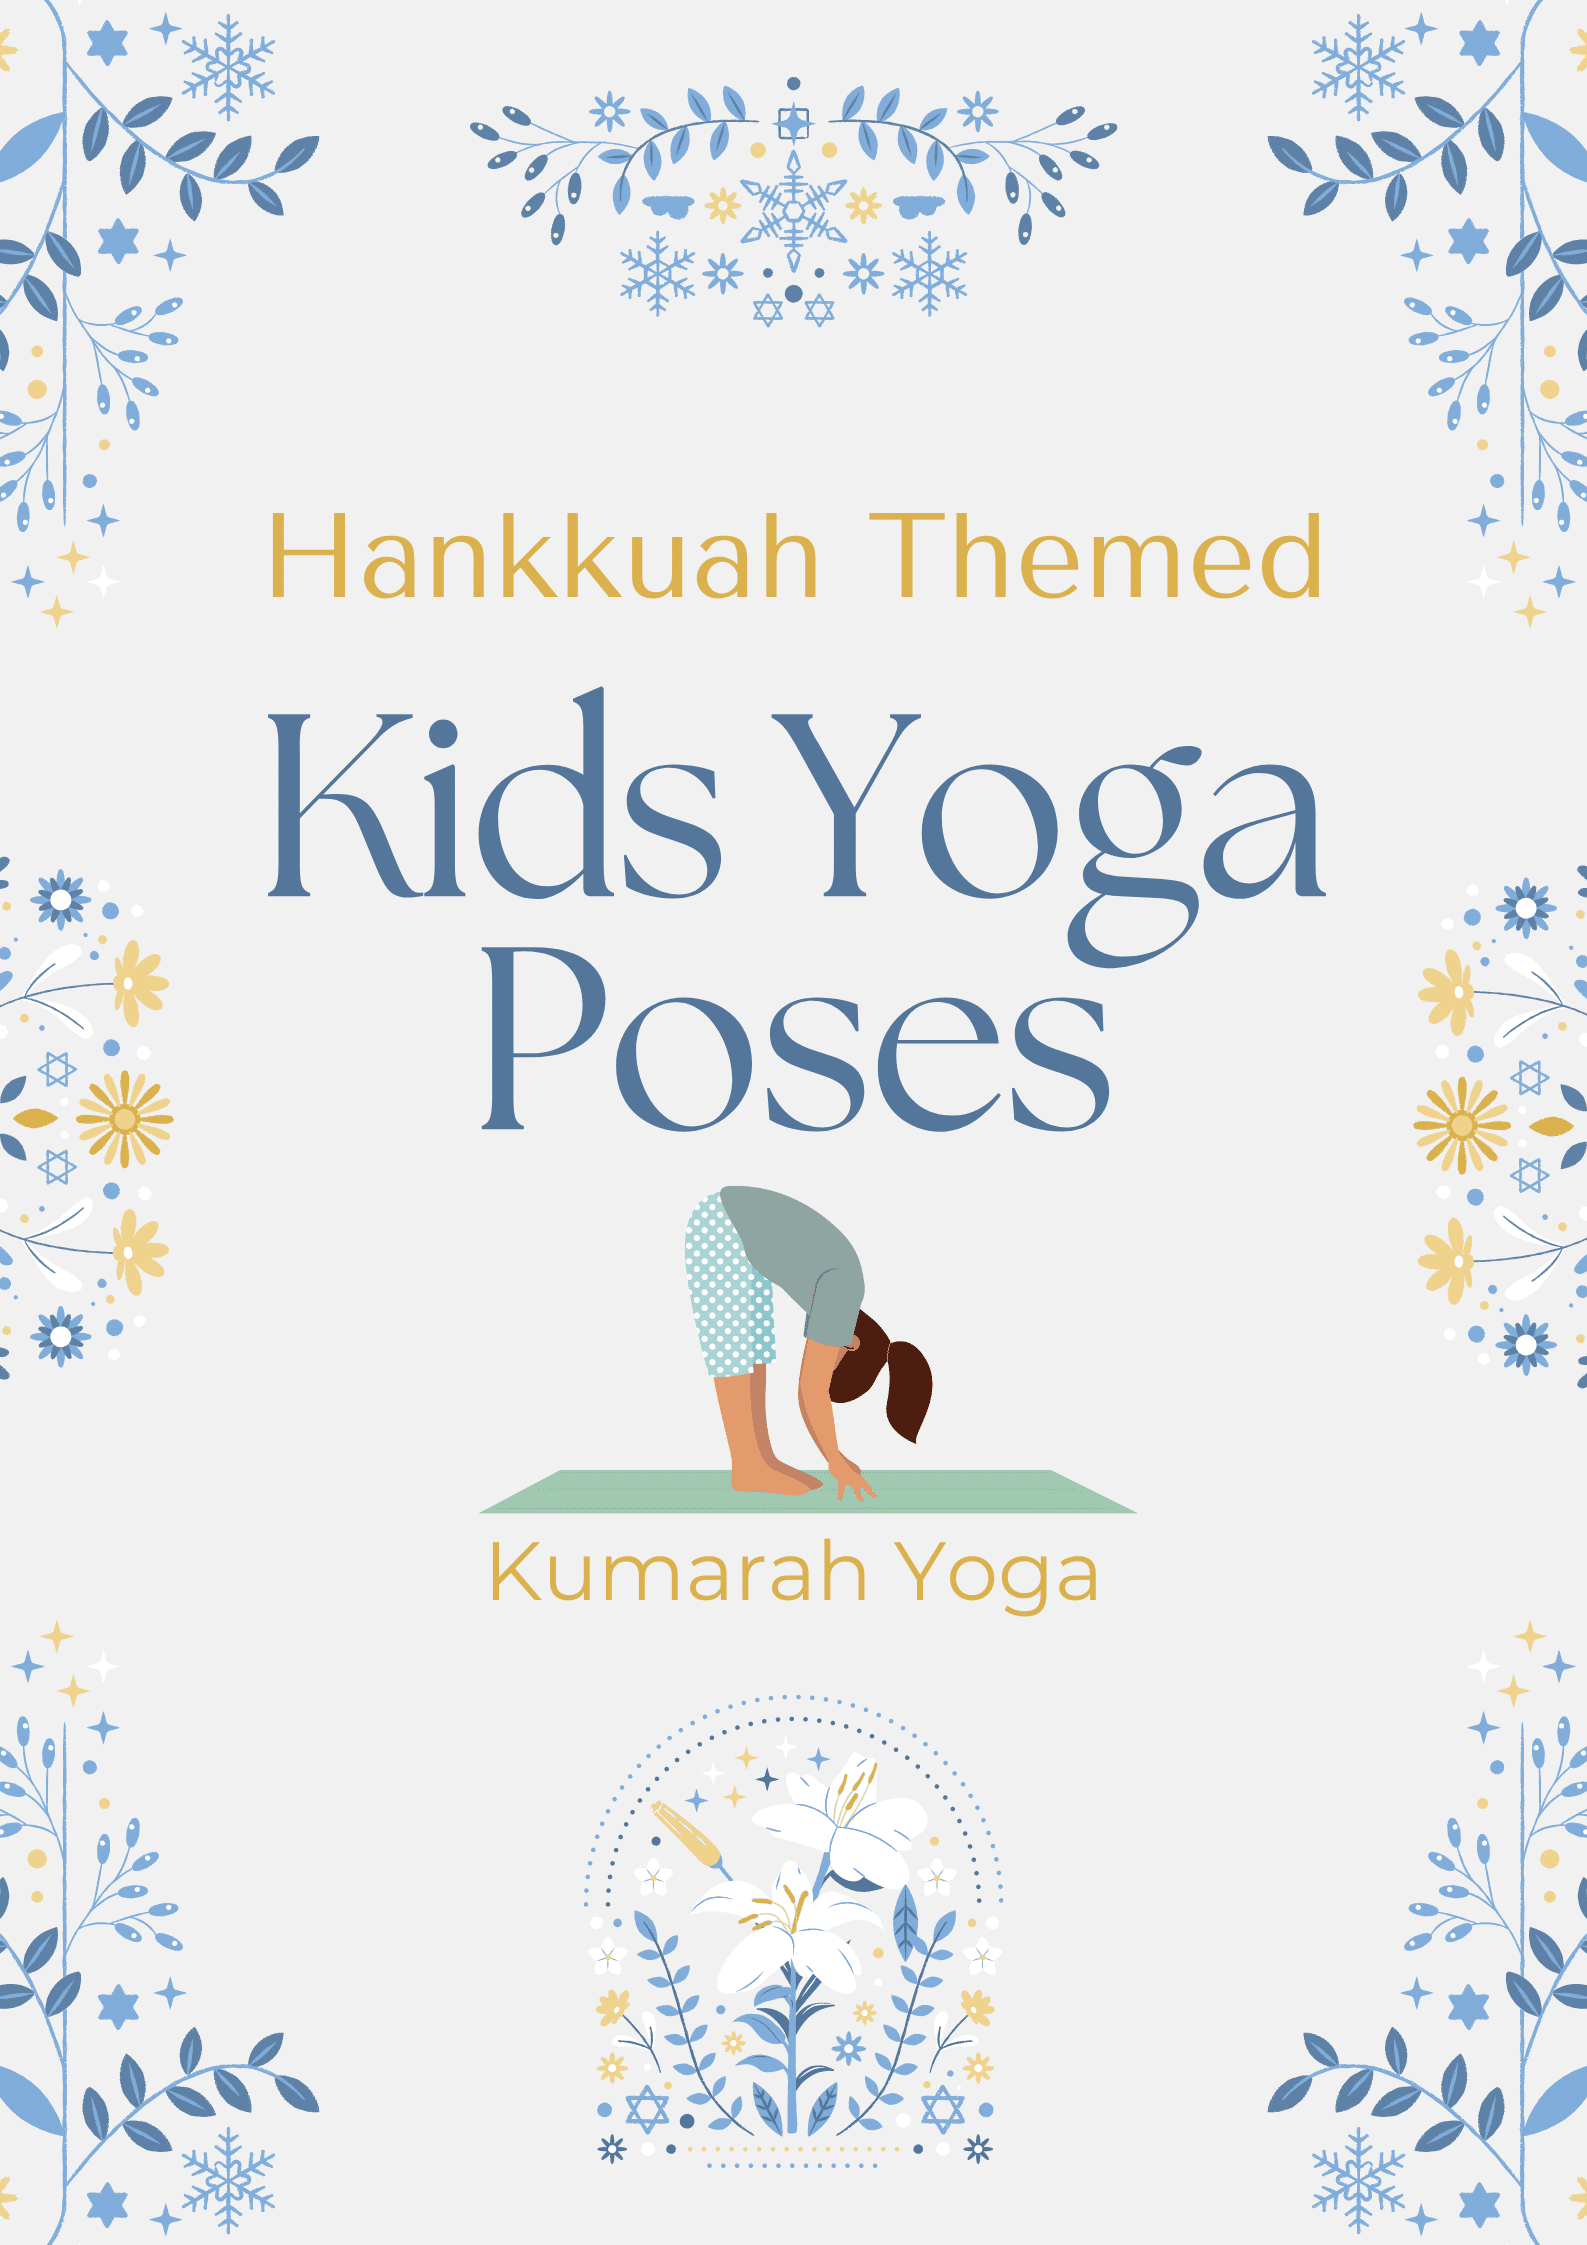 Morning and Evening Yoga Sequence for Kids by Kumarah Yoga